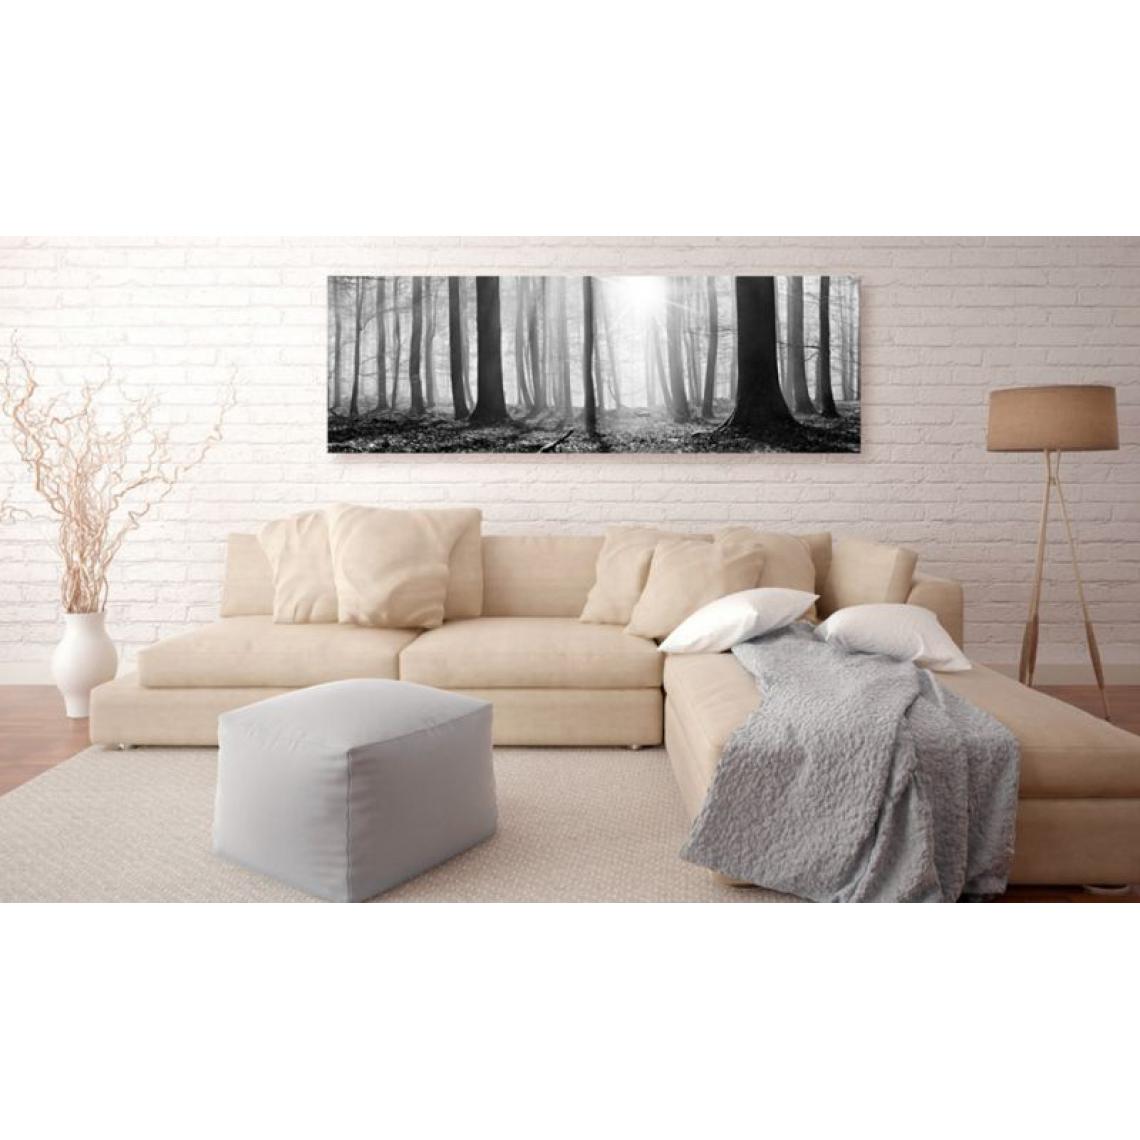 Artgeist - Tableau - Black and White Forest .Taille : 150x50 - Tableaux, peintures